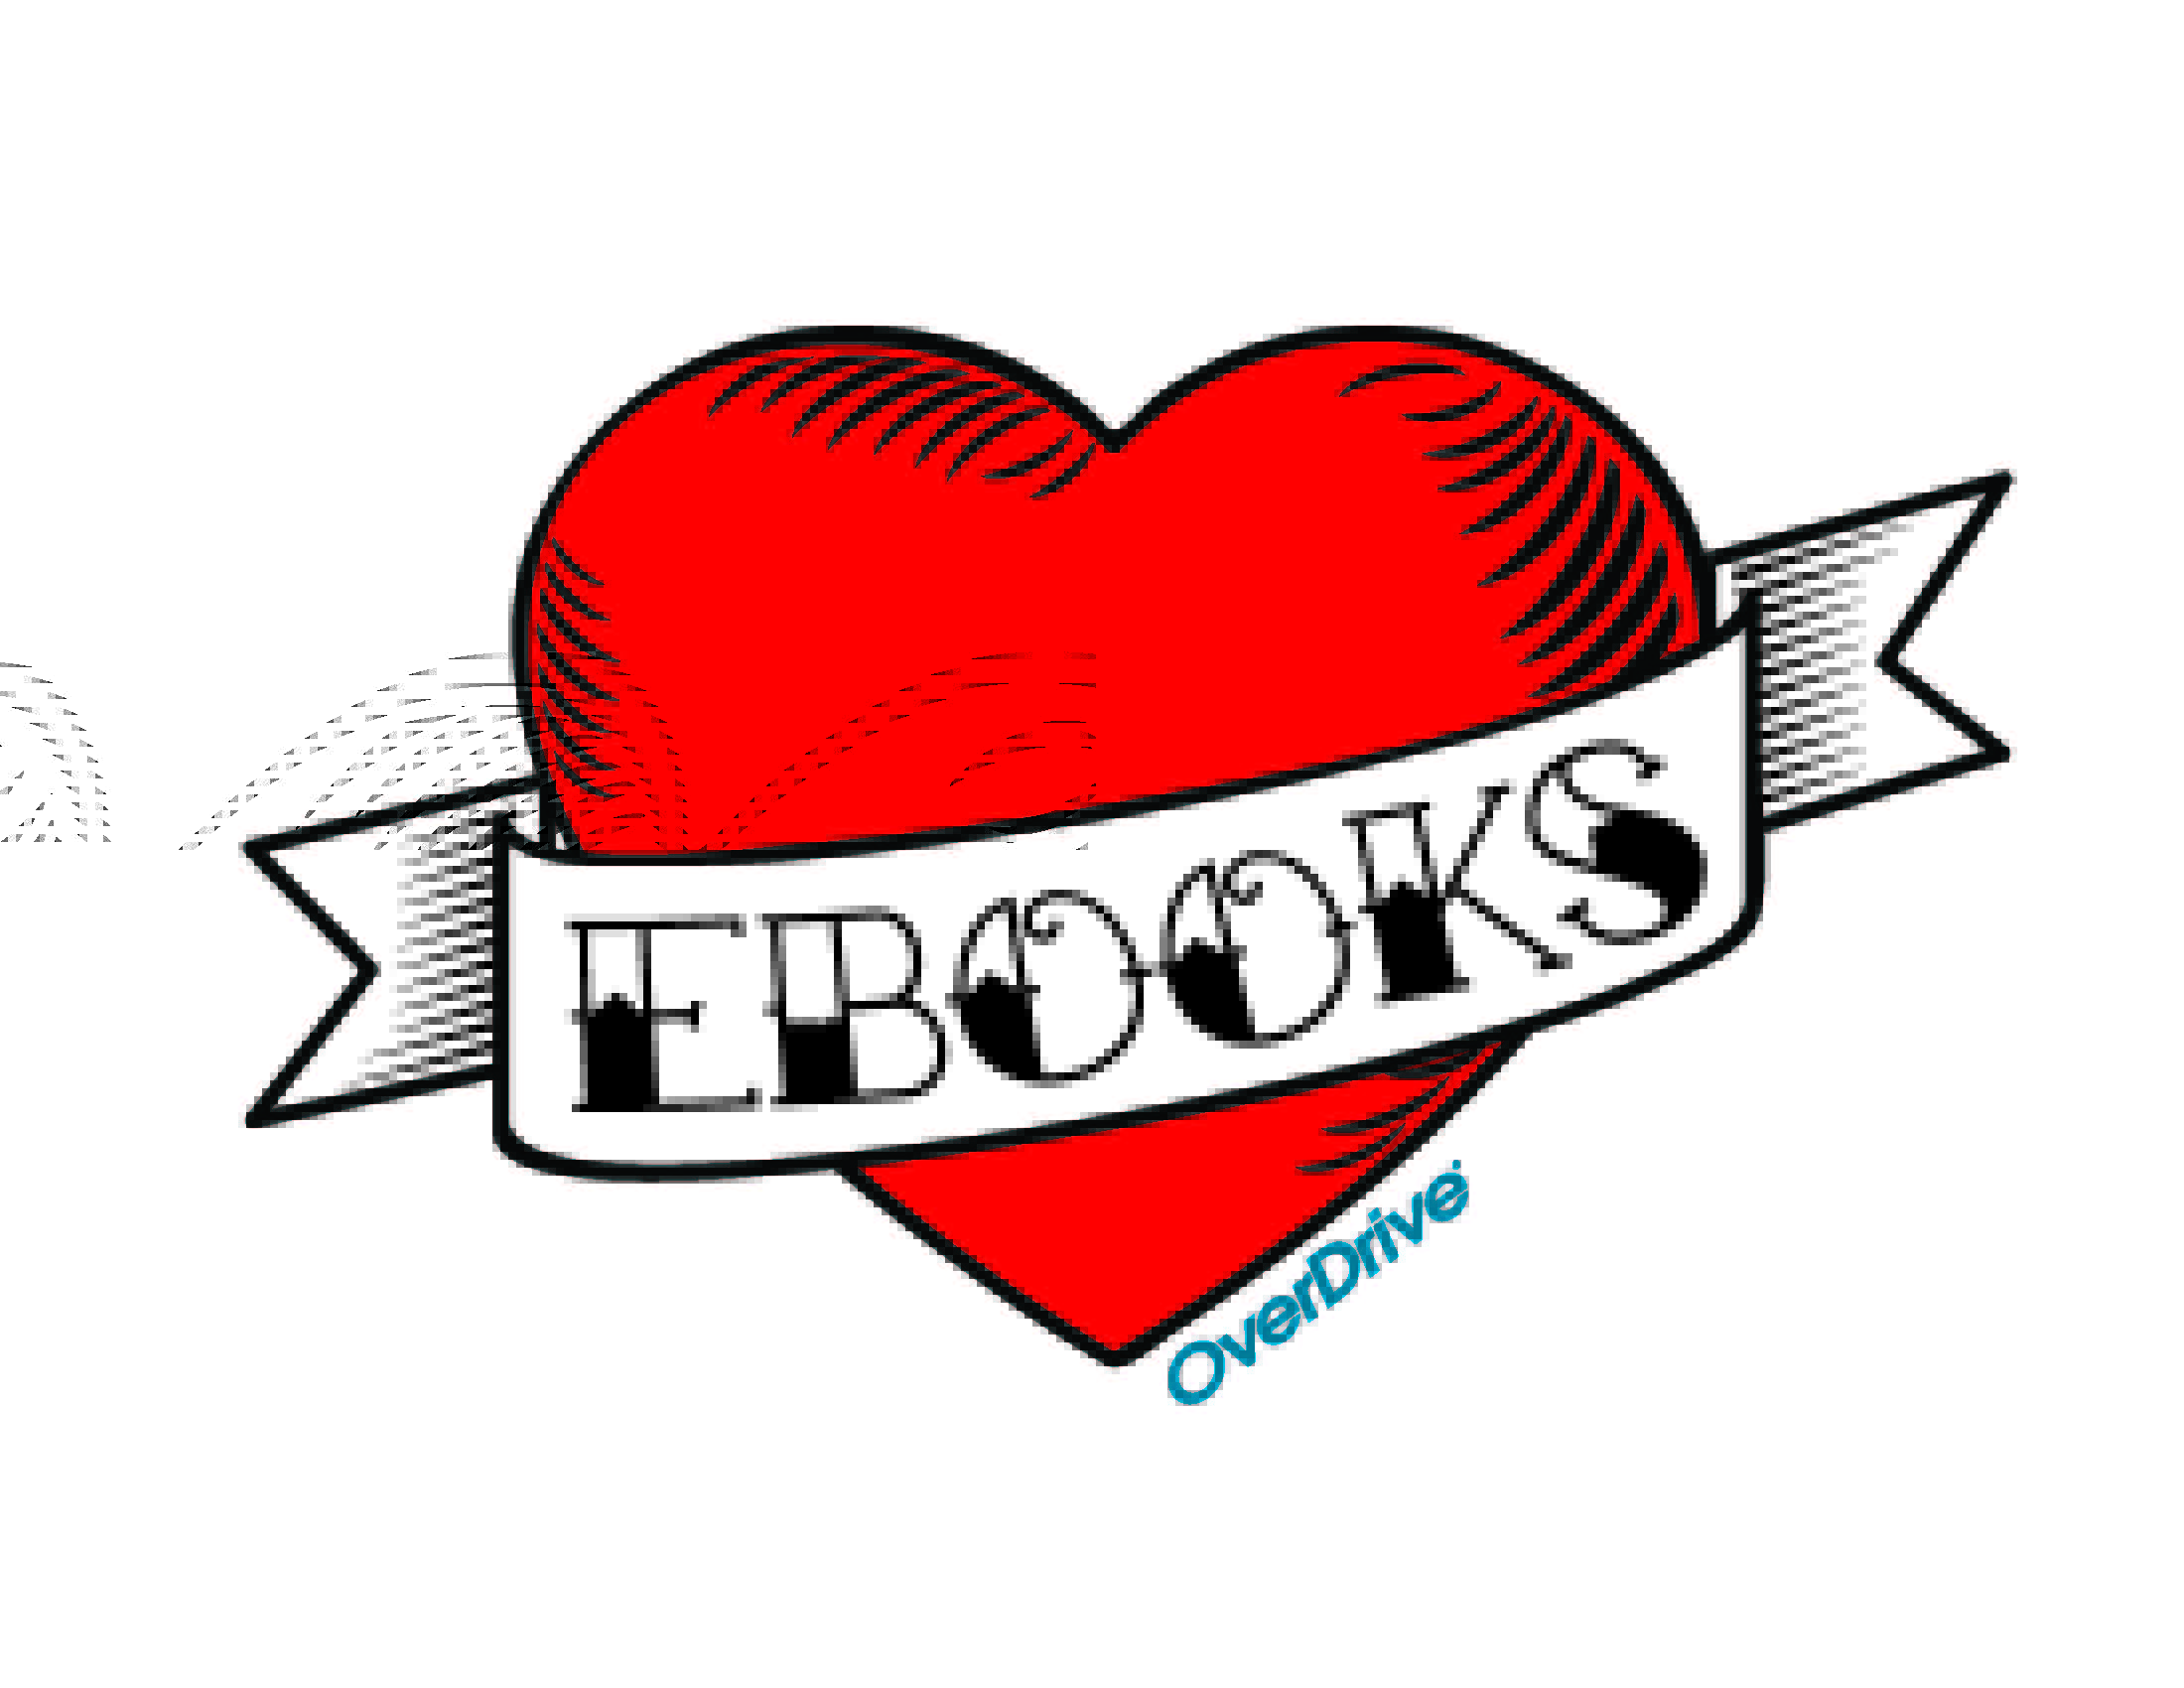 graphic of a black and white banner with the word ebooks written on top, draped over a red cartoon heart outlined in black.